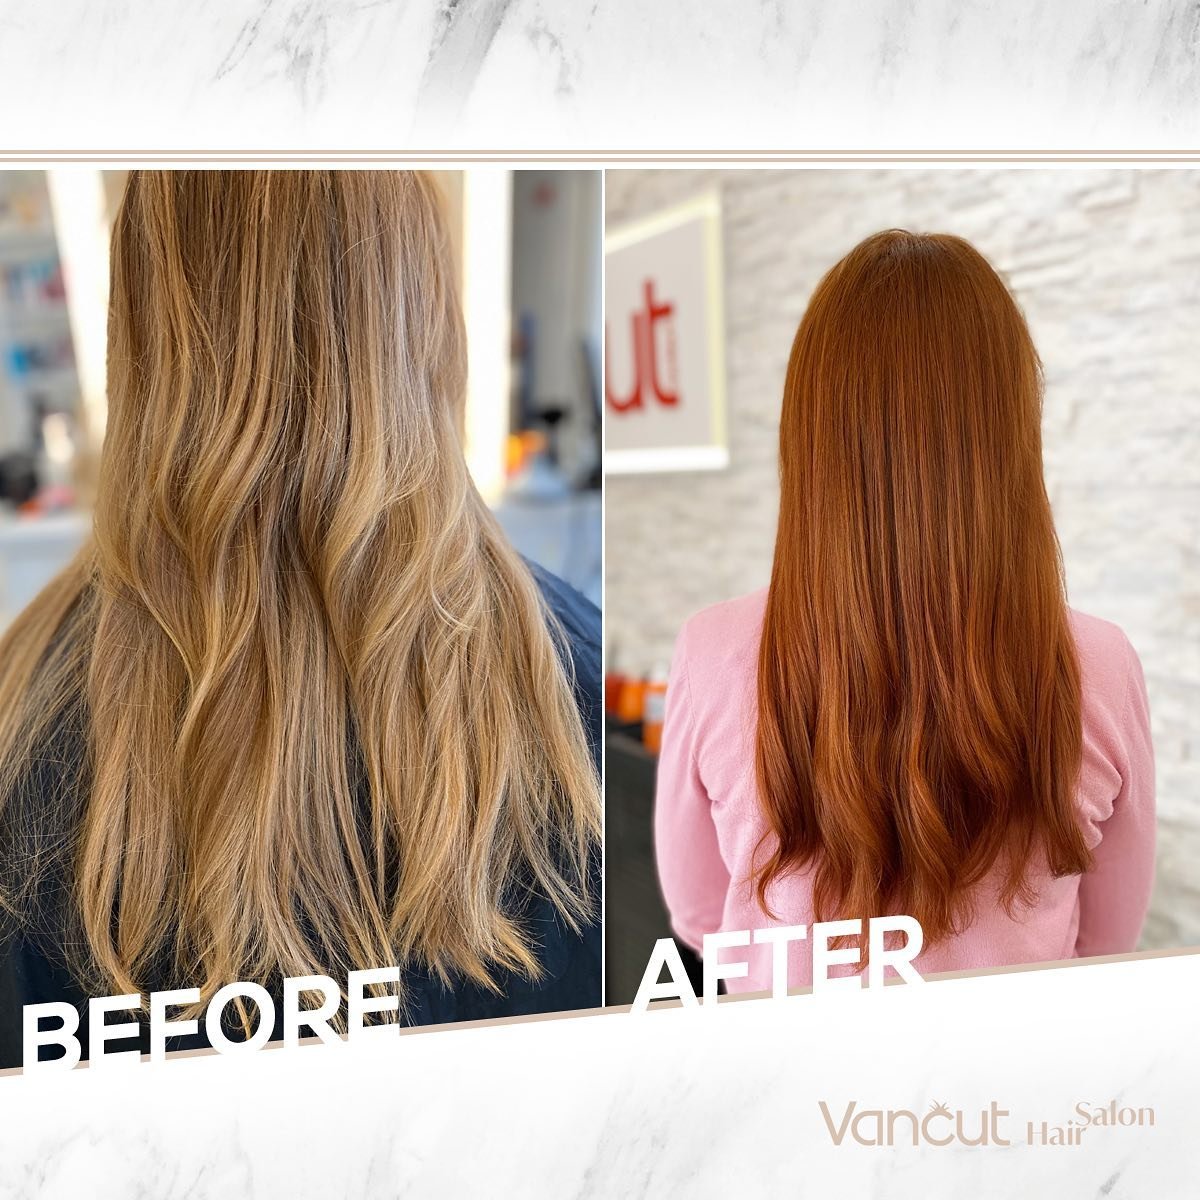 This client wanted her faded copper refreshed and we delivered! Transform your hair your way! And enjoy a complimentary premium coffee with your hair colouring services at Vancut hair salon. 🤩❤️🔝

#vanlifestyle #vanlife #vancouverhairdressers #vanc